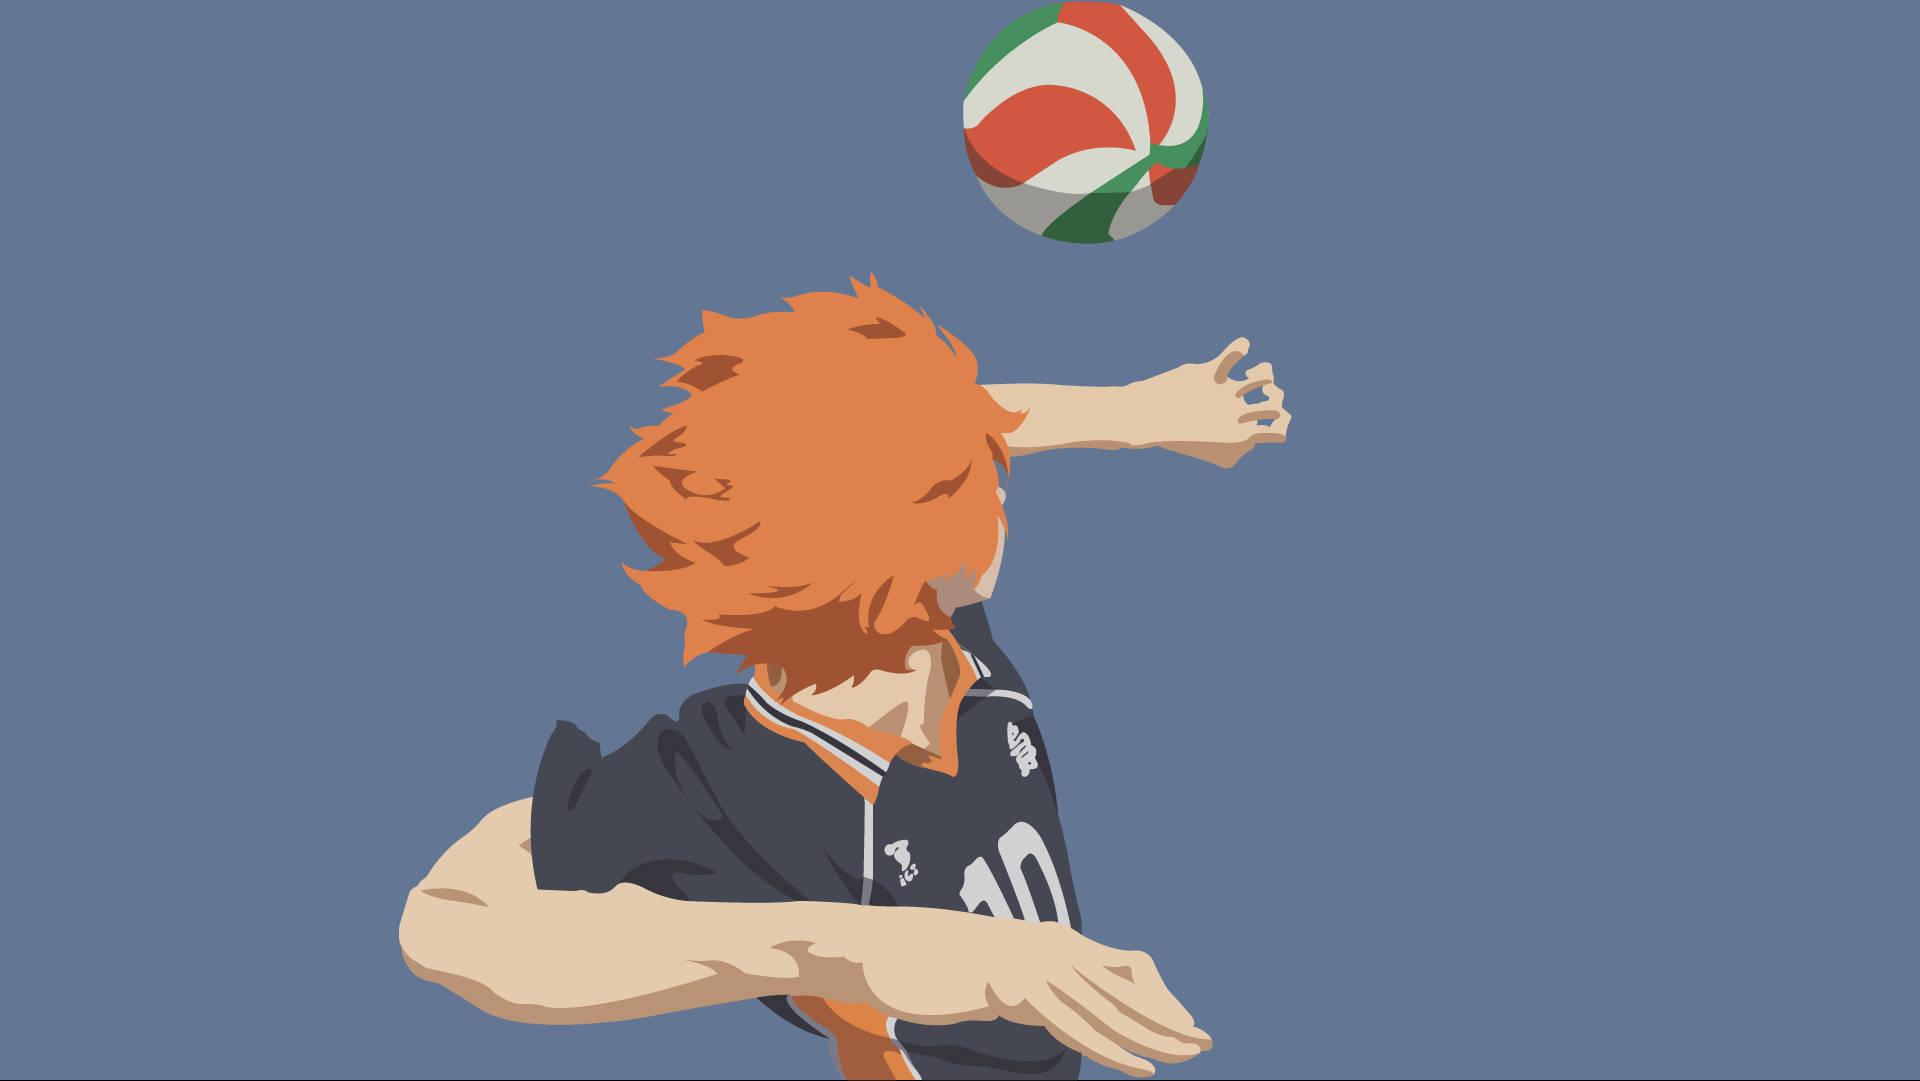 Aesthetic Volleyball Wallpapers  Wallpaper Cave